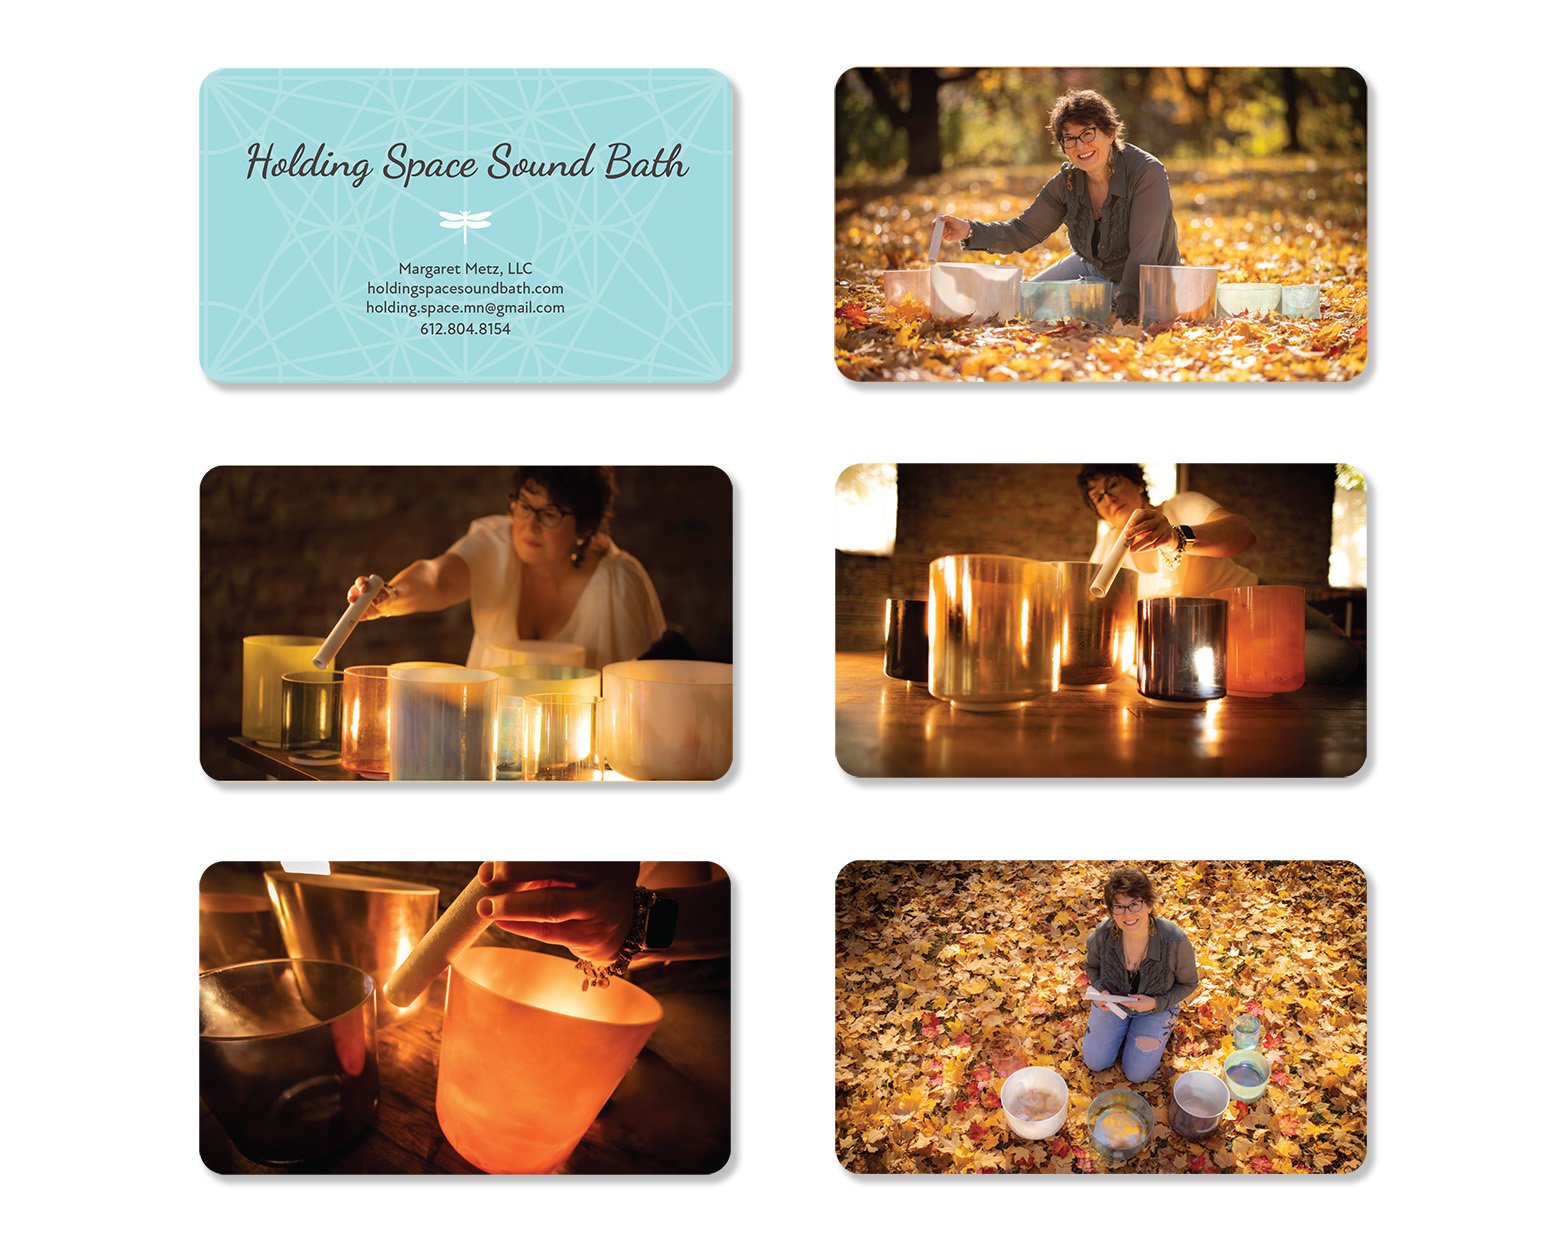 Holding Space Sound Bath Business Card Front with variations of photos on opposite side